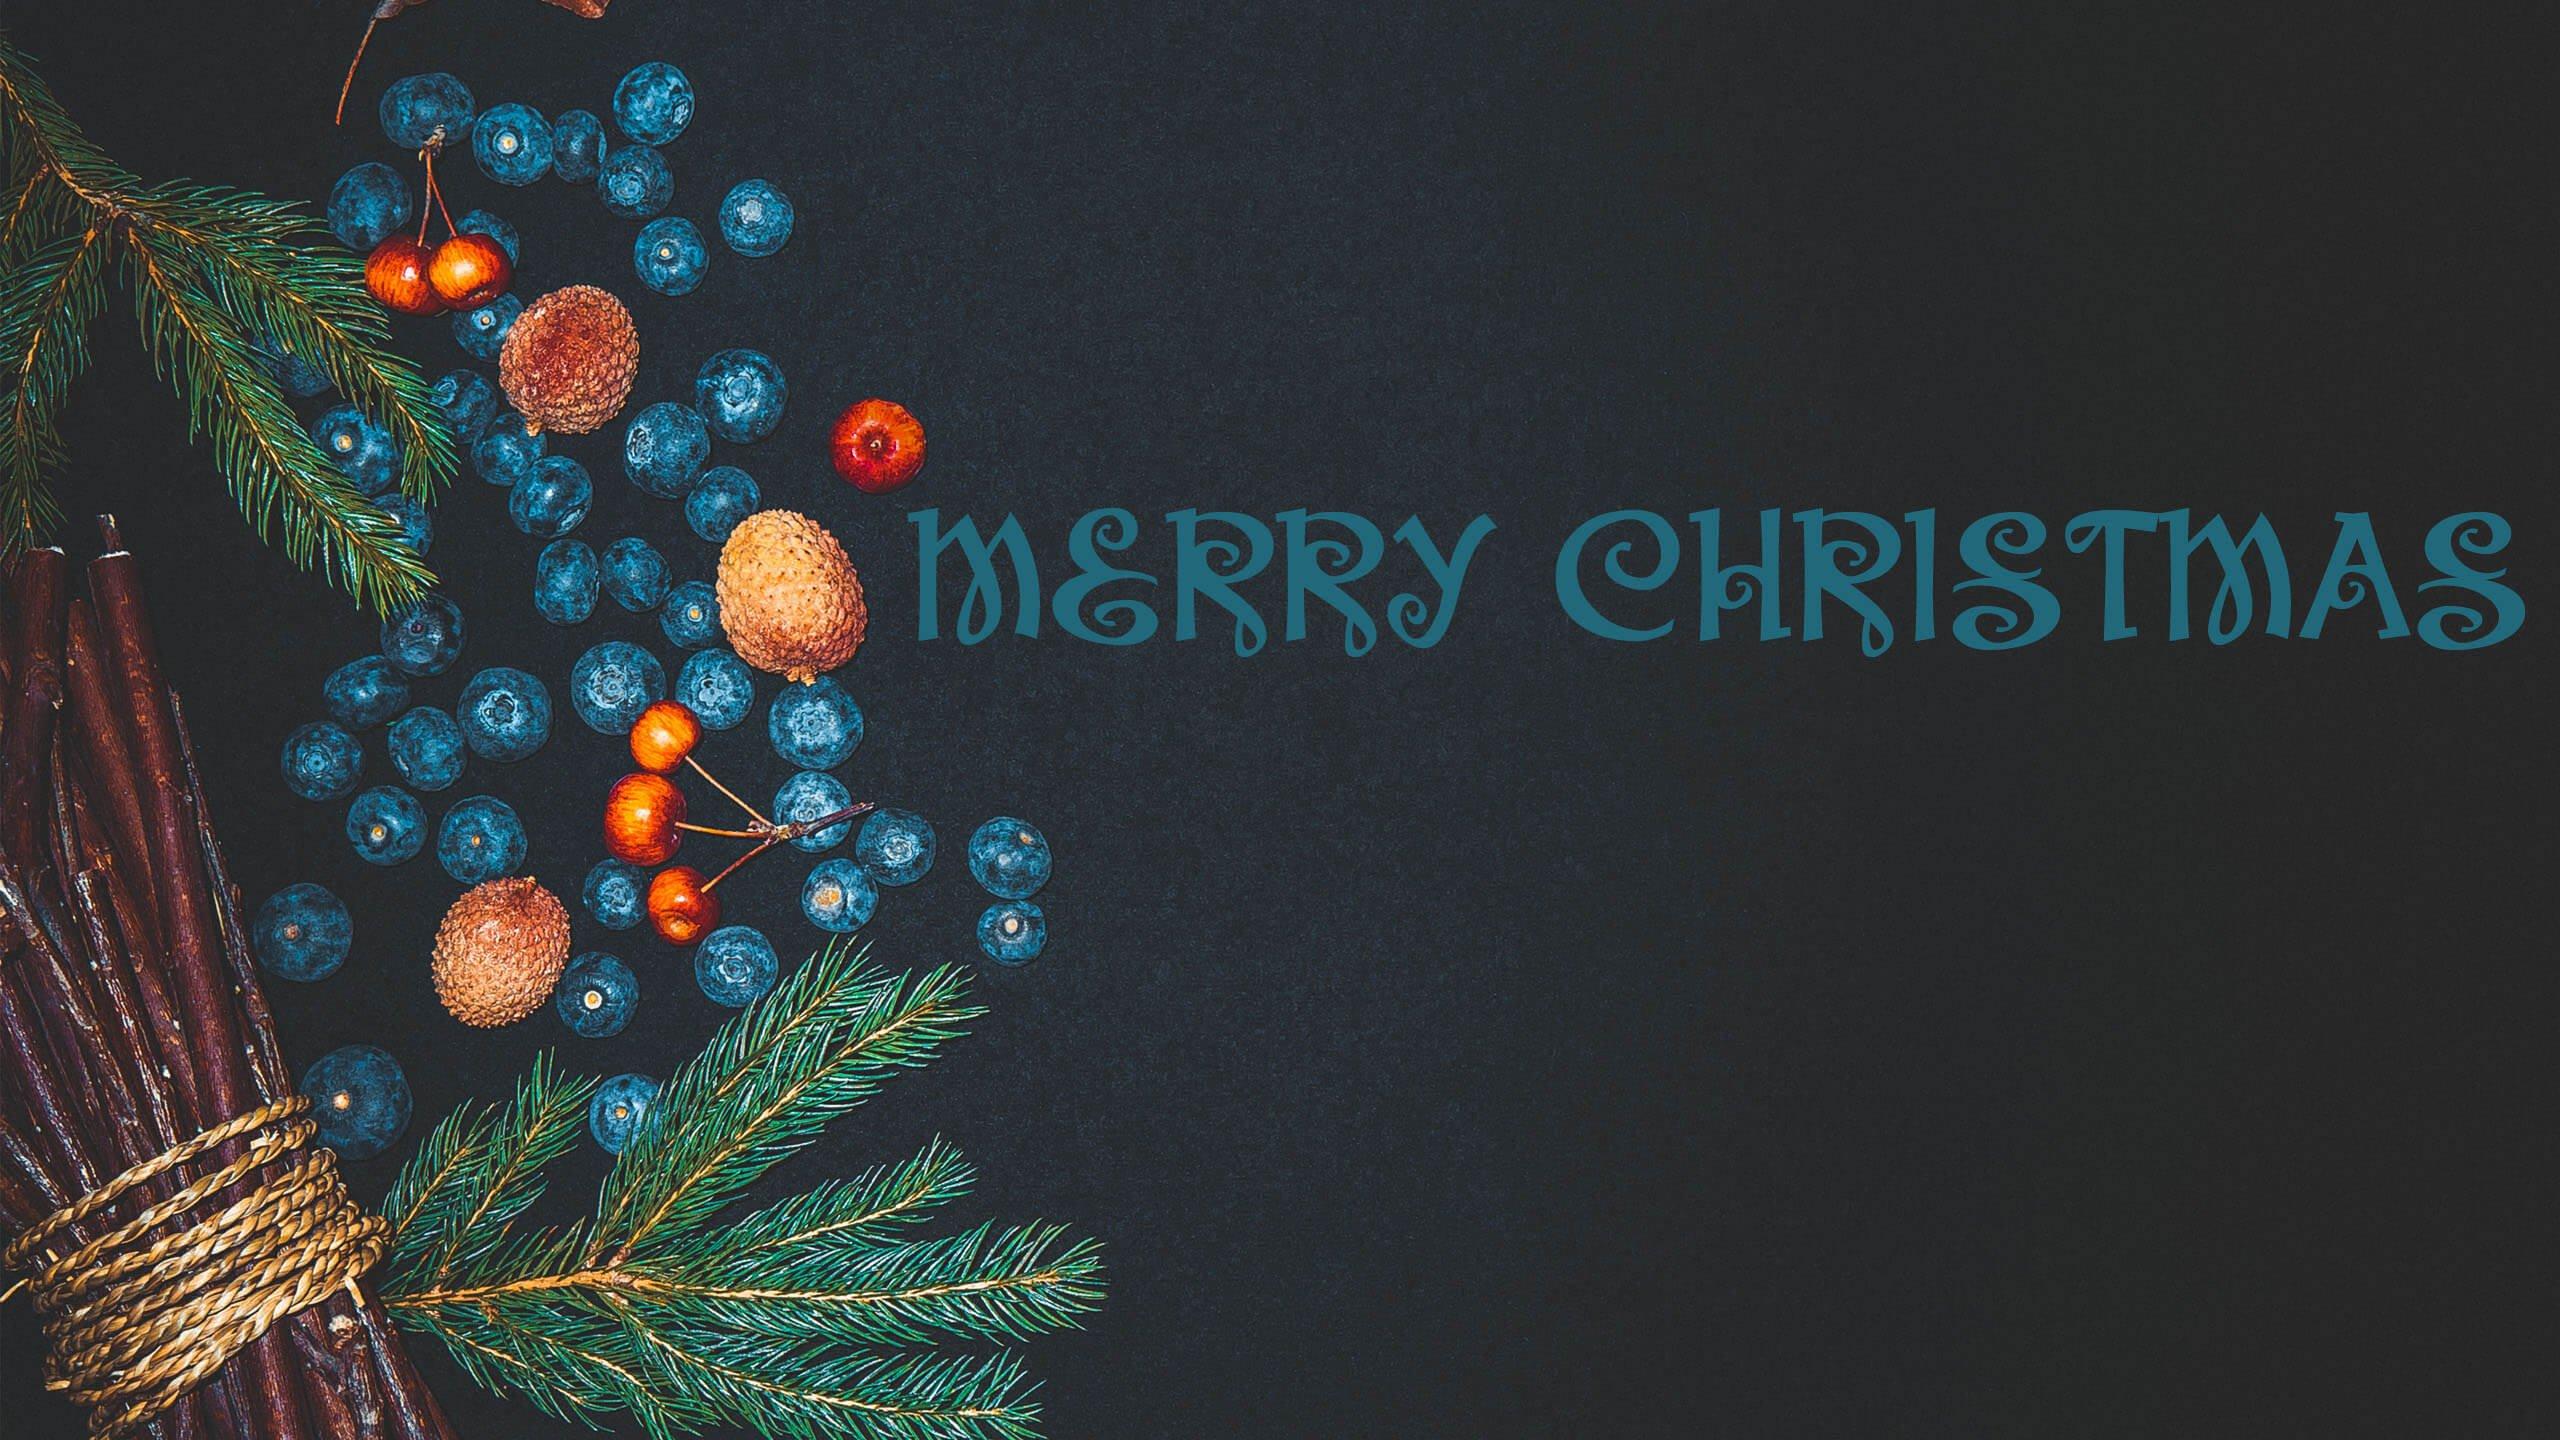 70+ Best Christmas Wallpapers To Share 2020